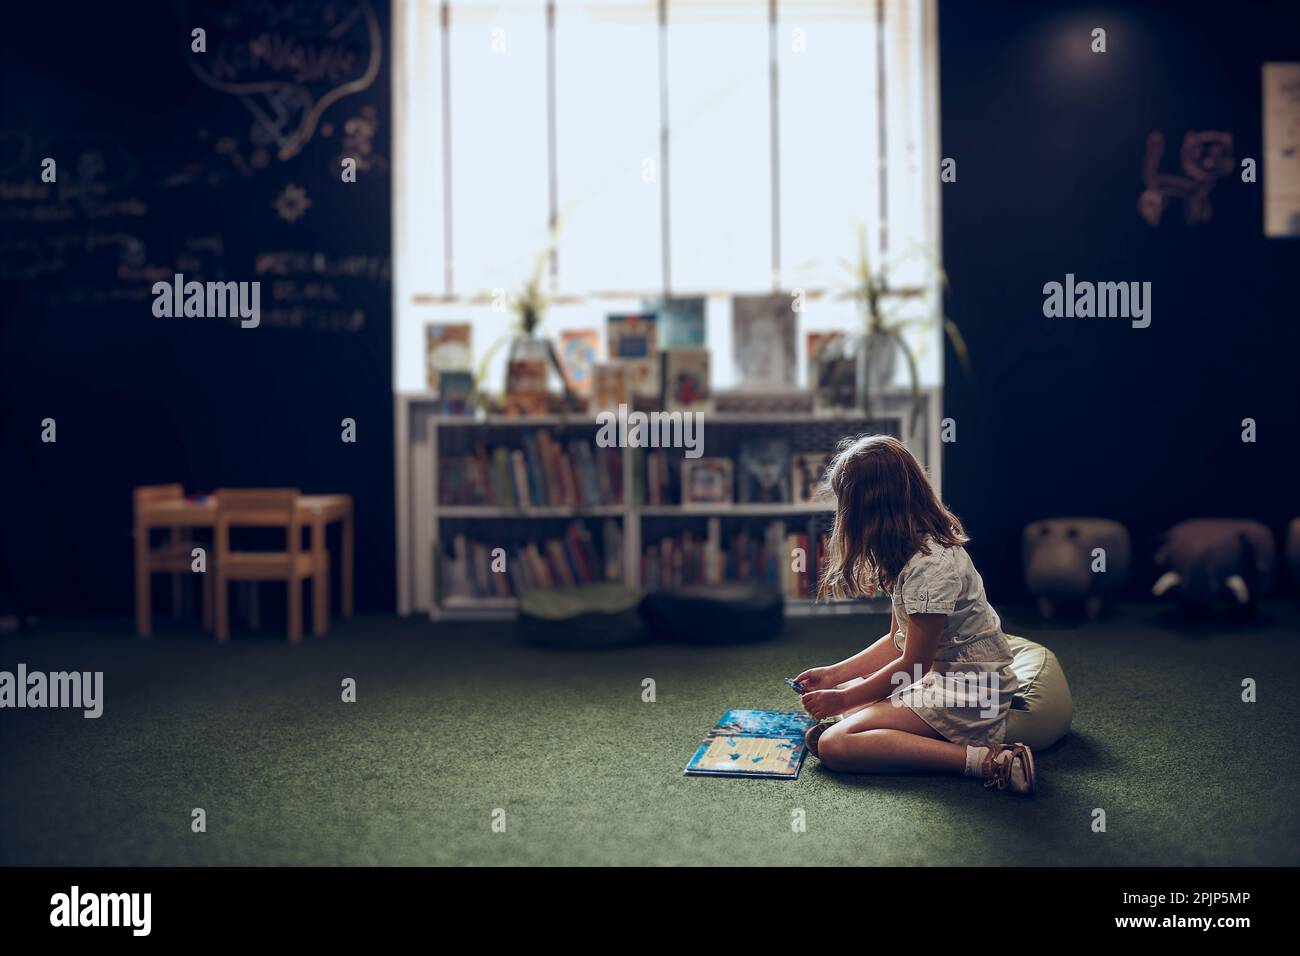 Child solving riddle in book in school library. Primary school pupil is involved in book with riddles. Smart girl learning to solve problems. Benefits Stock Photo